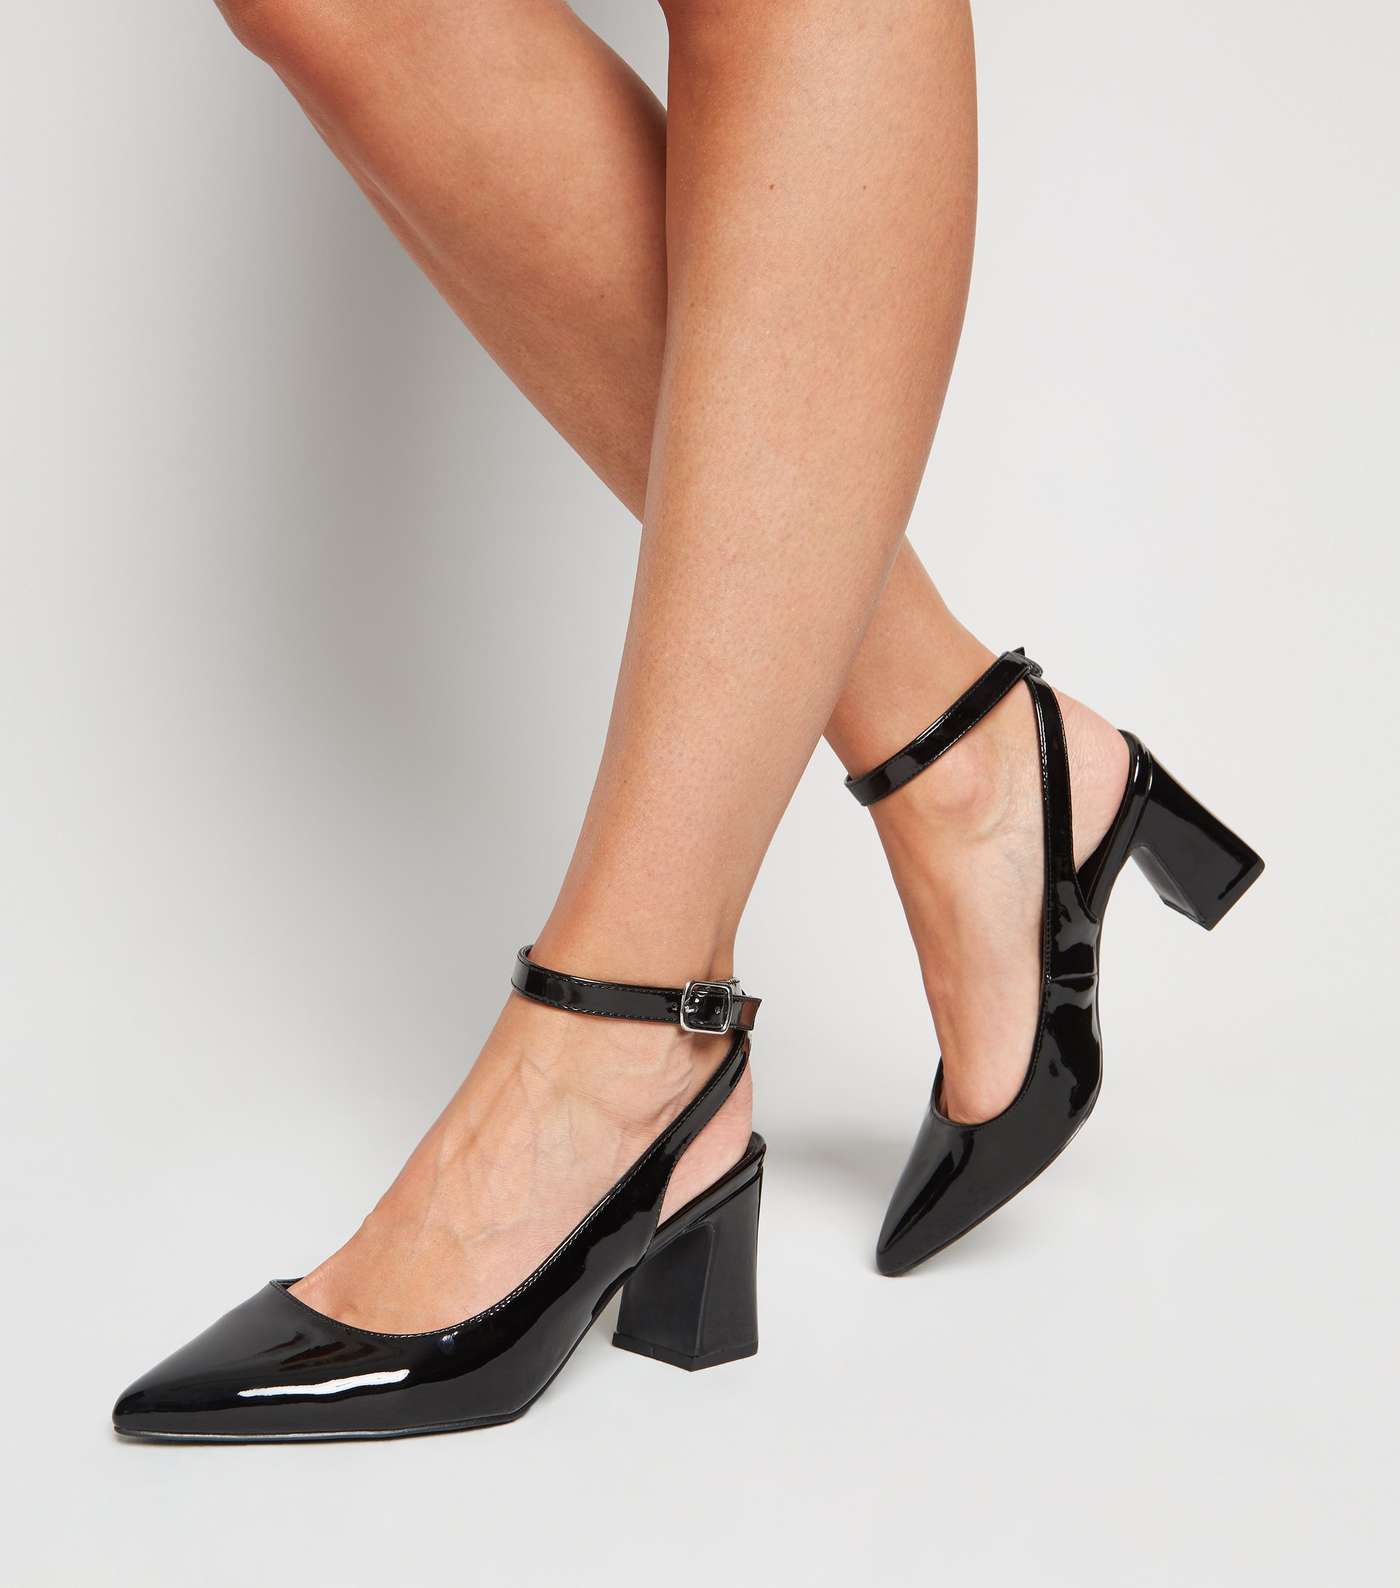 Wide Fit Black Patent Flared Heel Courts Image 2